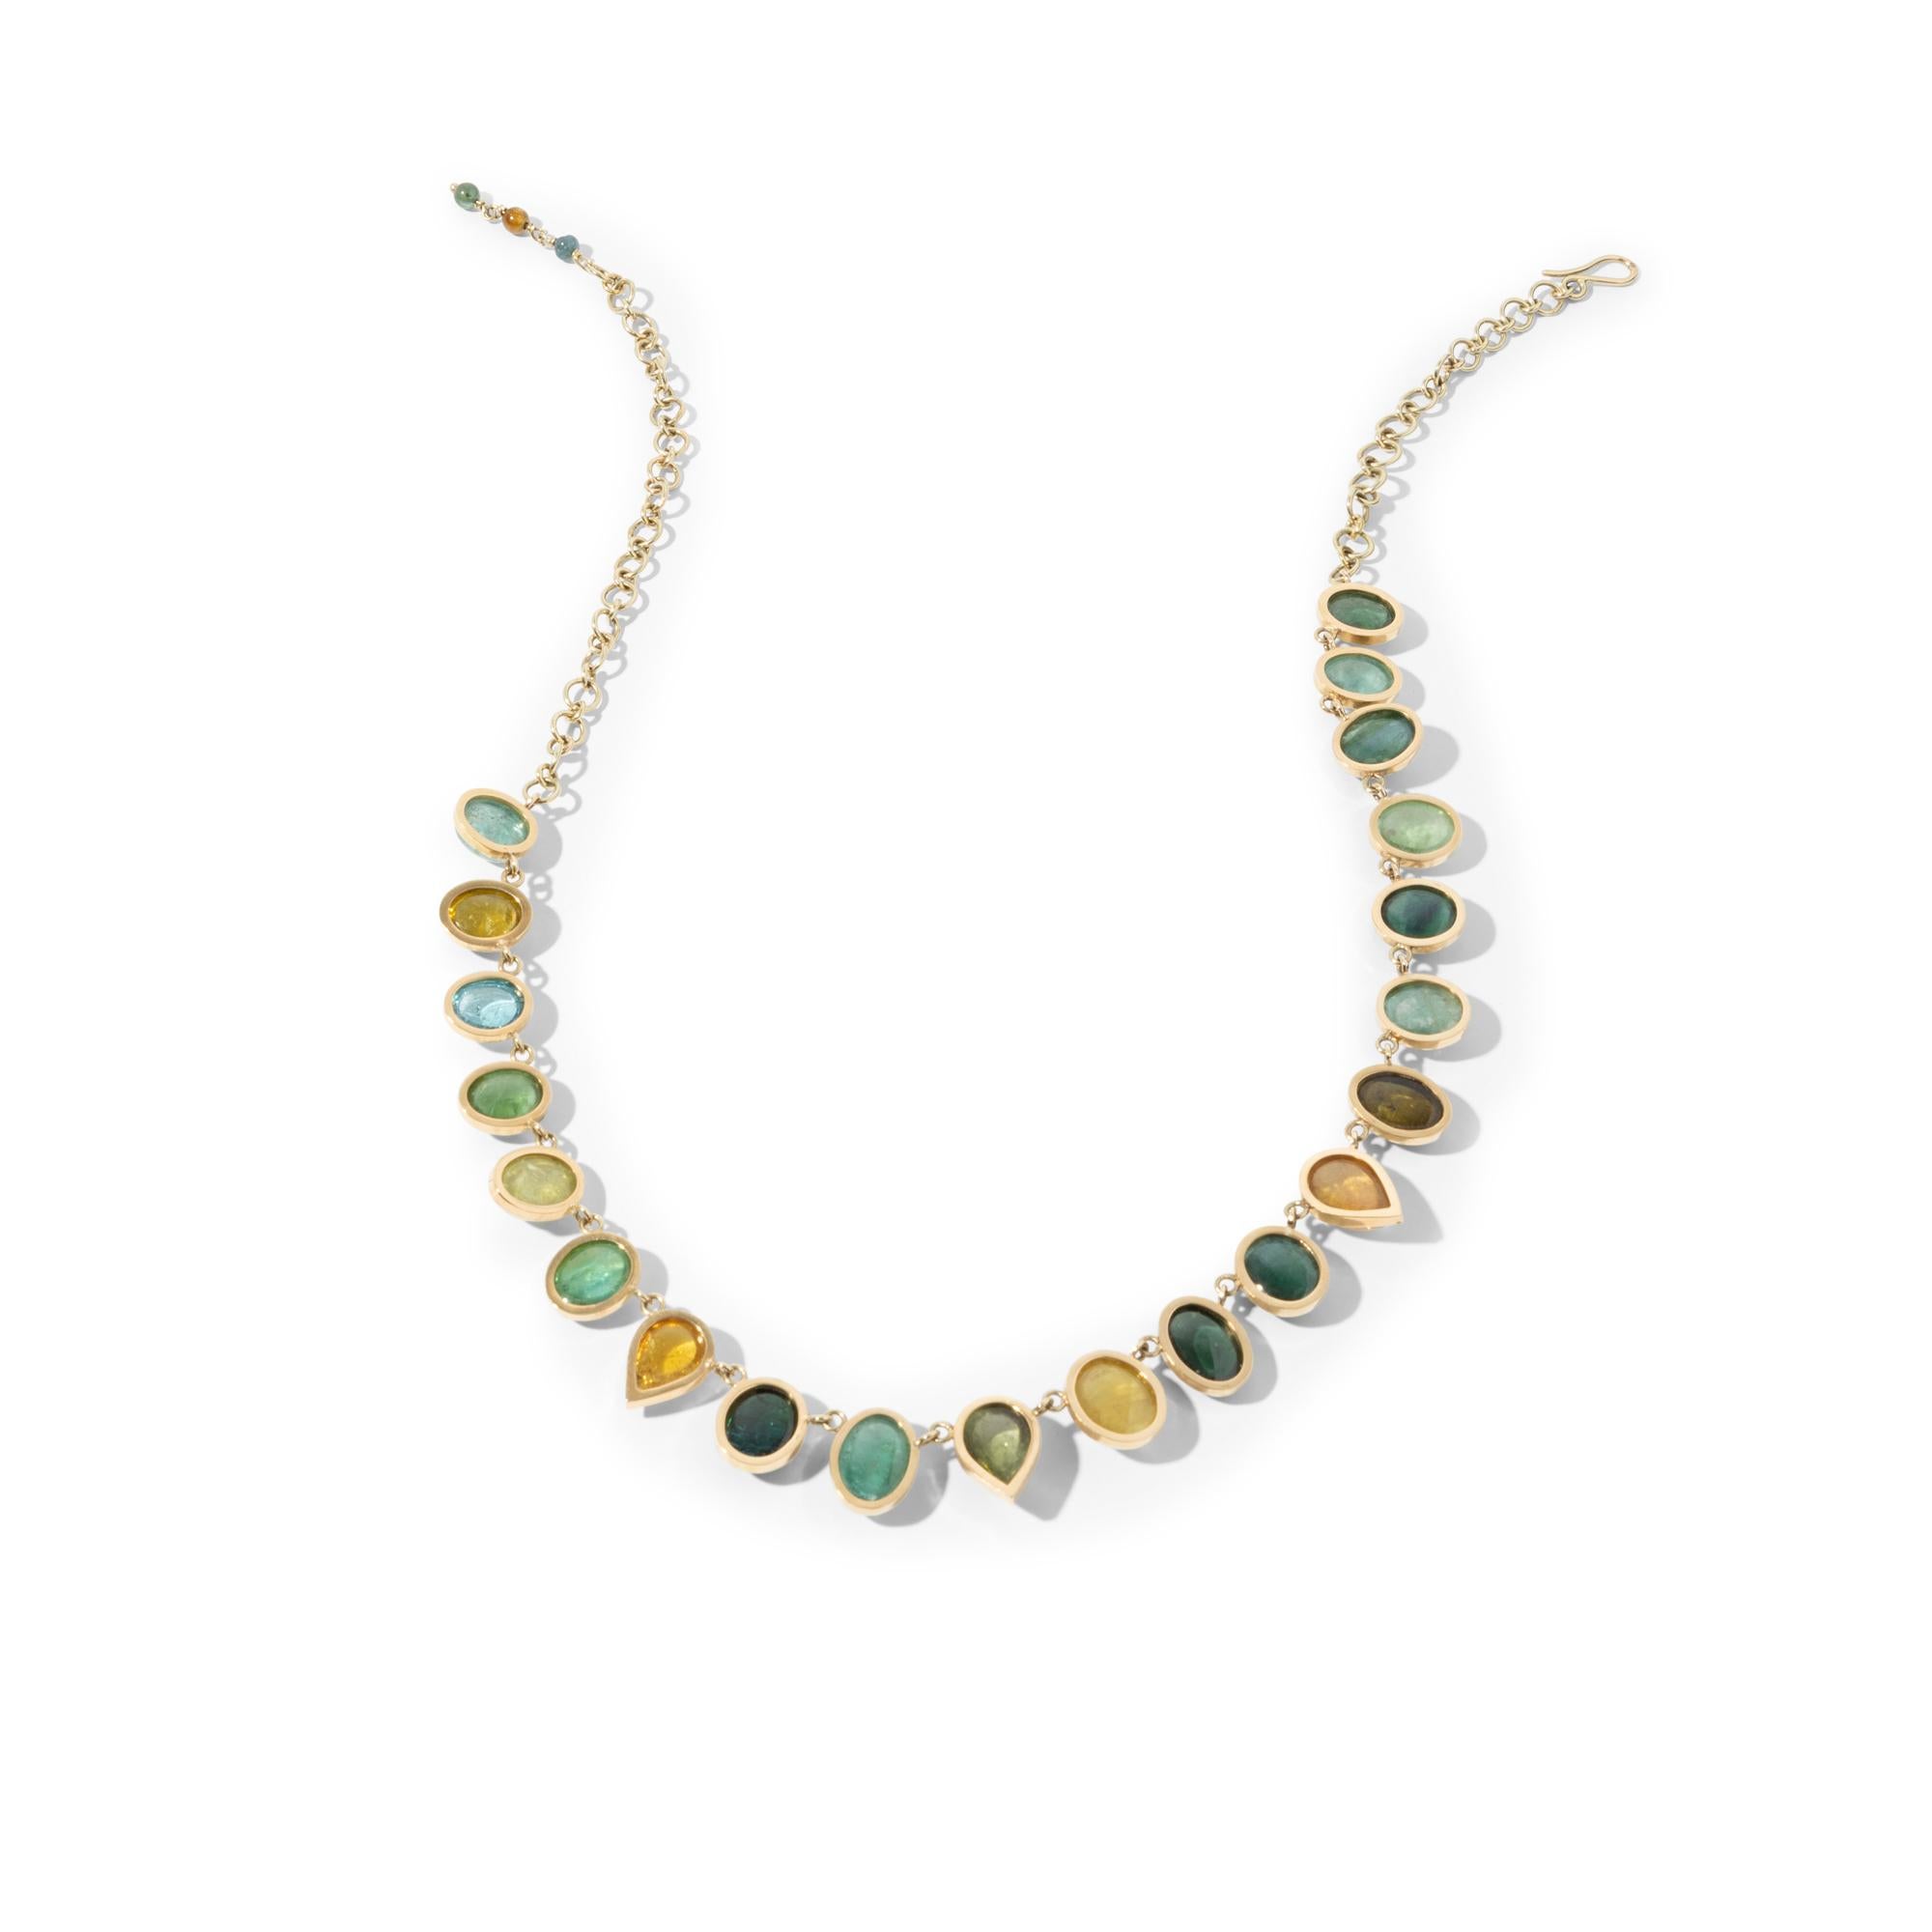 One-of-a-kind handcrafted 18kt yellow gold necklace with 21 cabochon (smooth) cut tourmalines in green, yellow, and blue in different shapes. These exquisite stones all vary slightly in size and shape and the colour scheme of green to blue hues